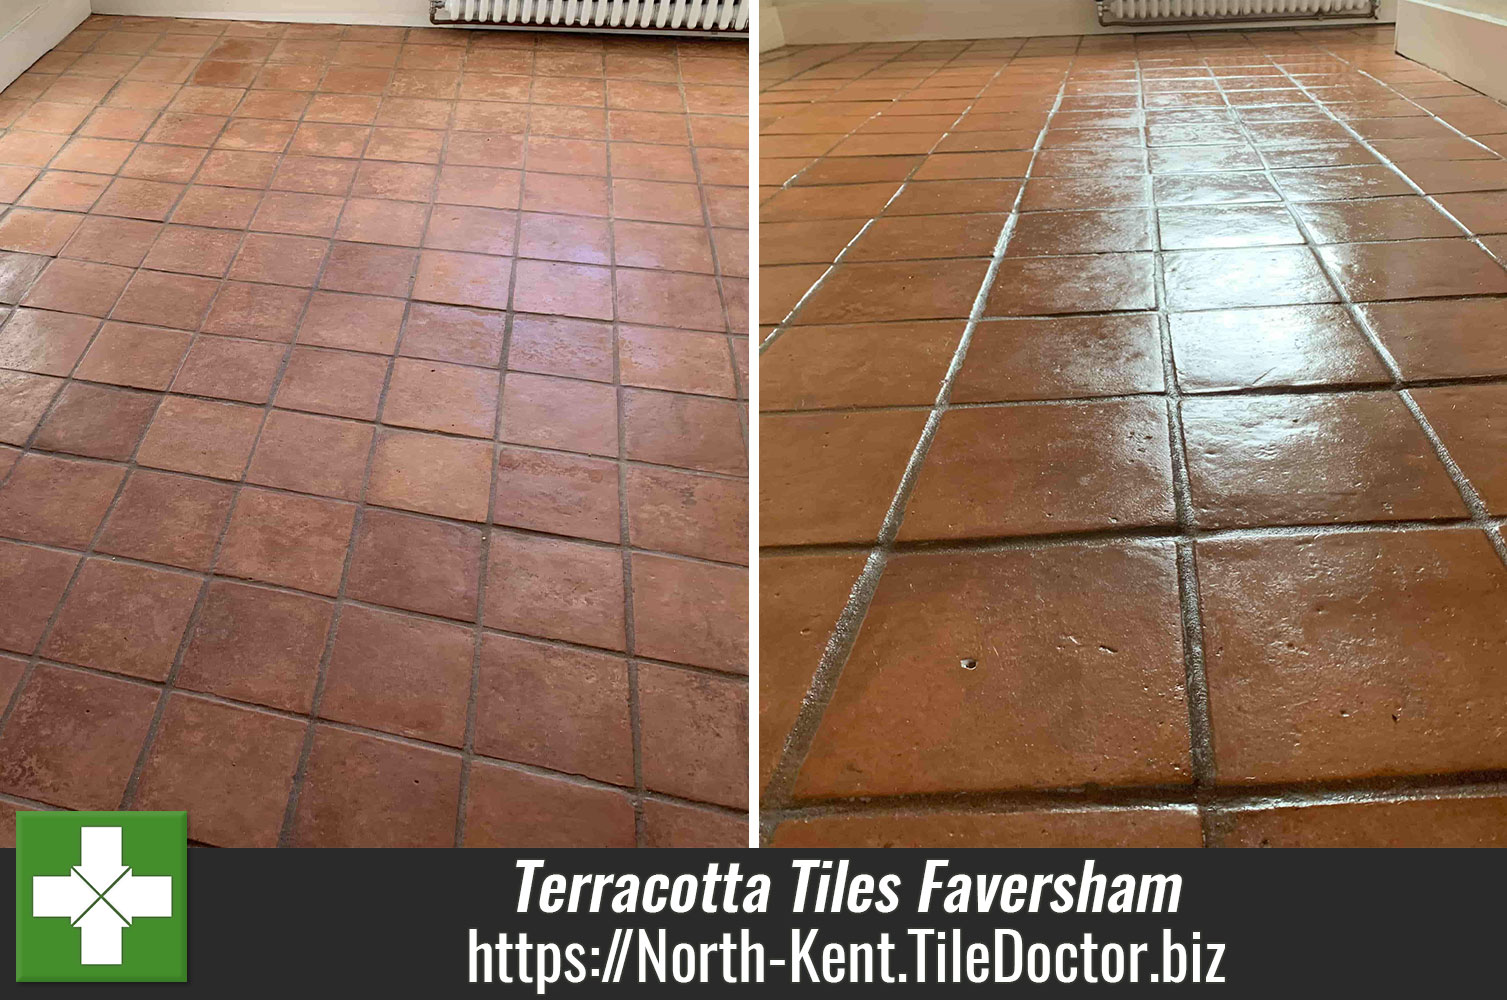 Maintaining Terracotta Tiles in Faversham With Tile Doctor Products